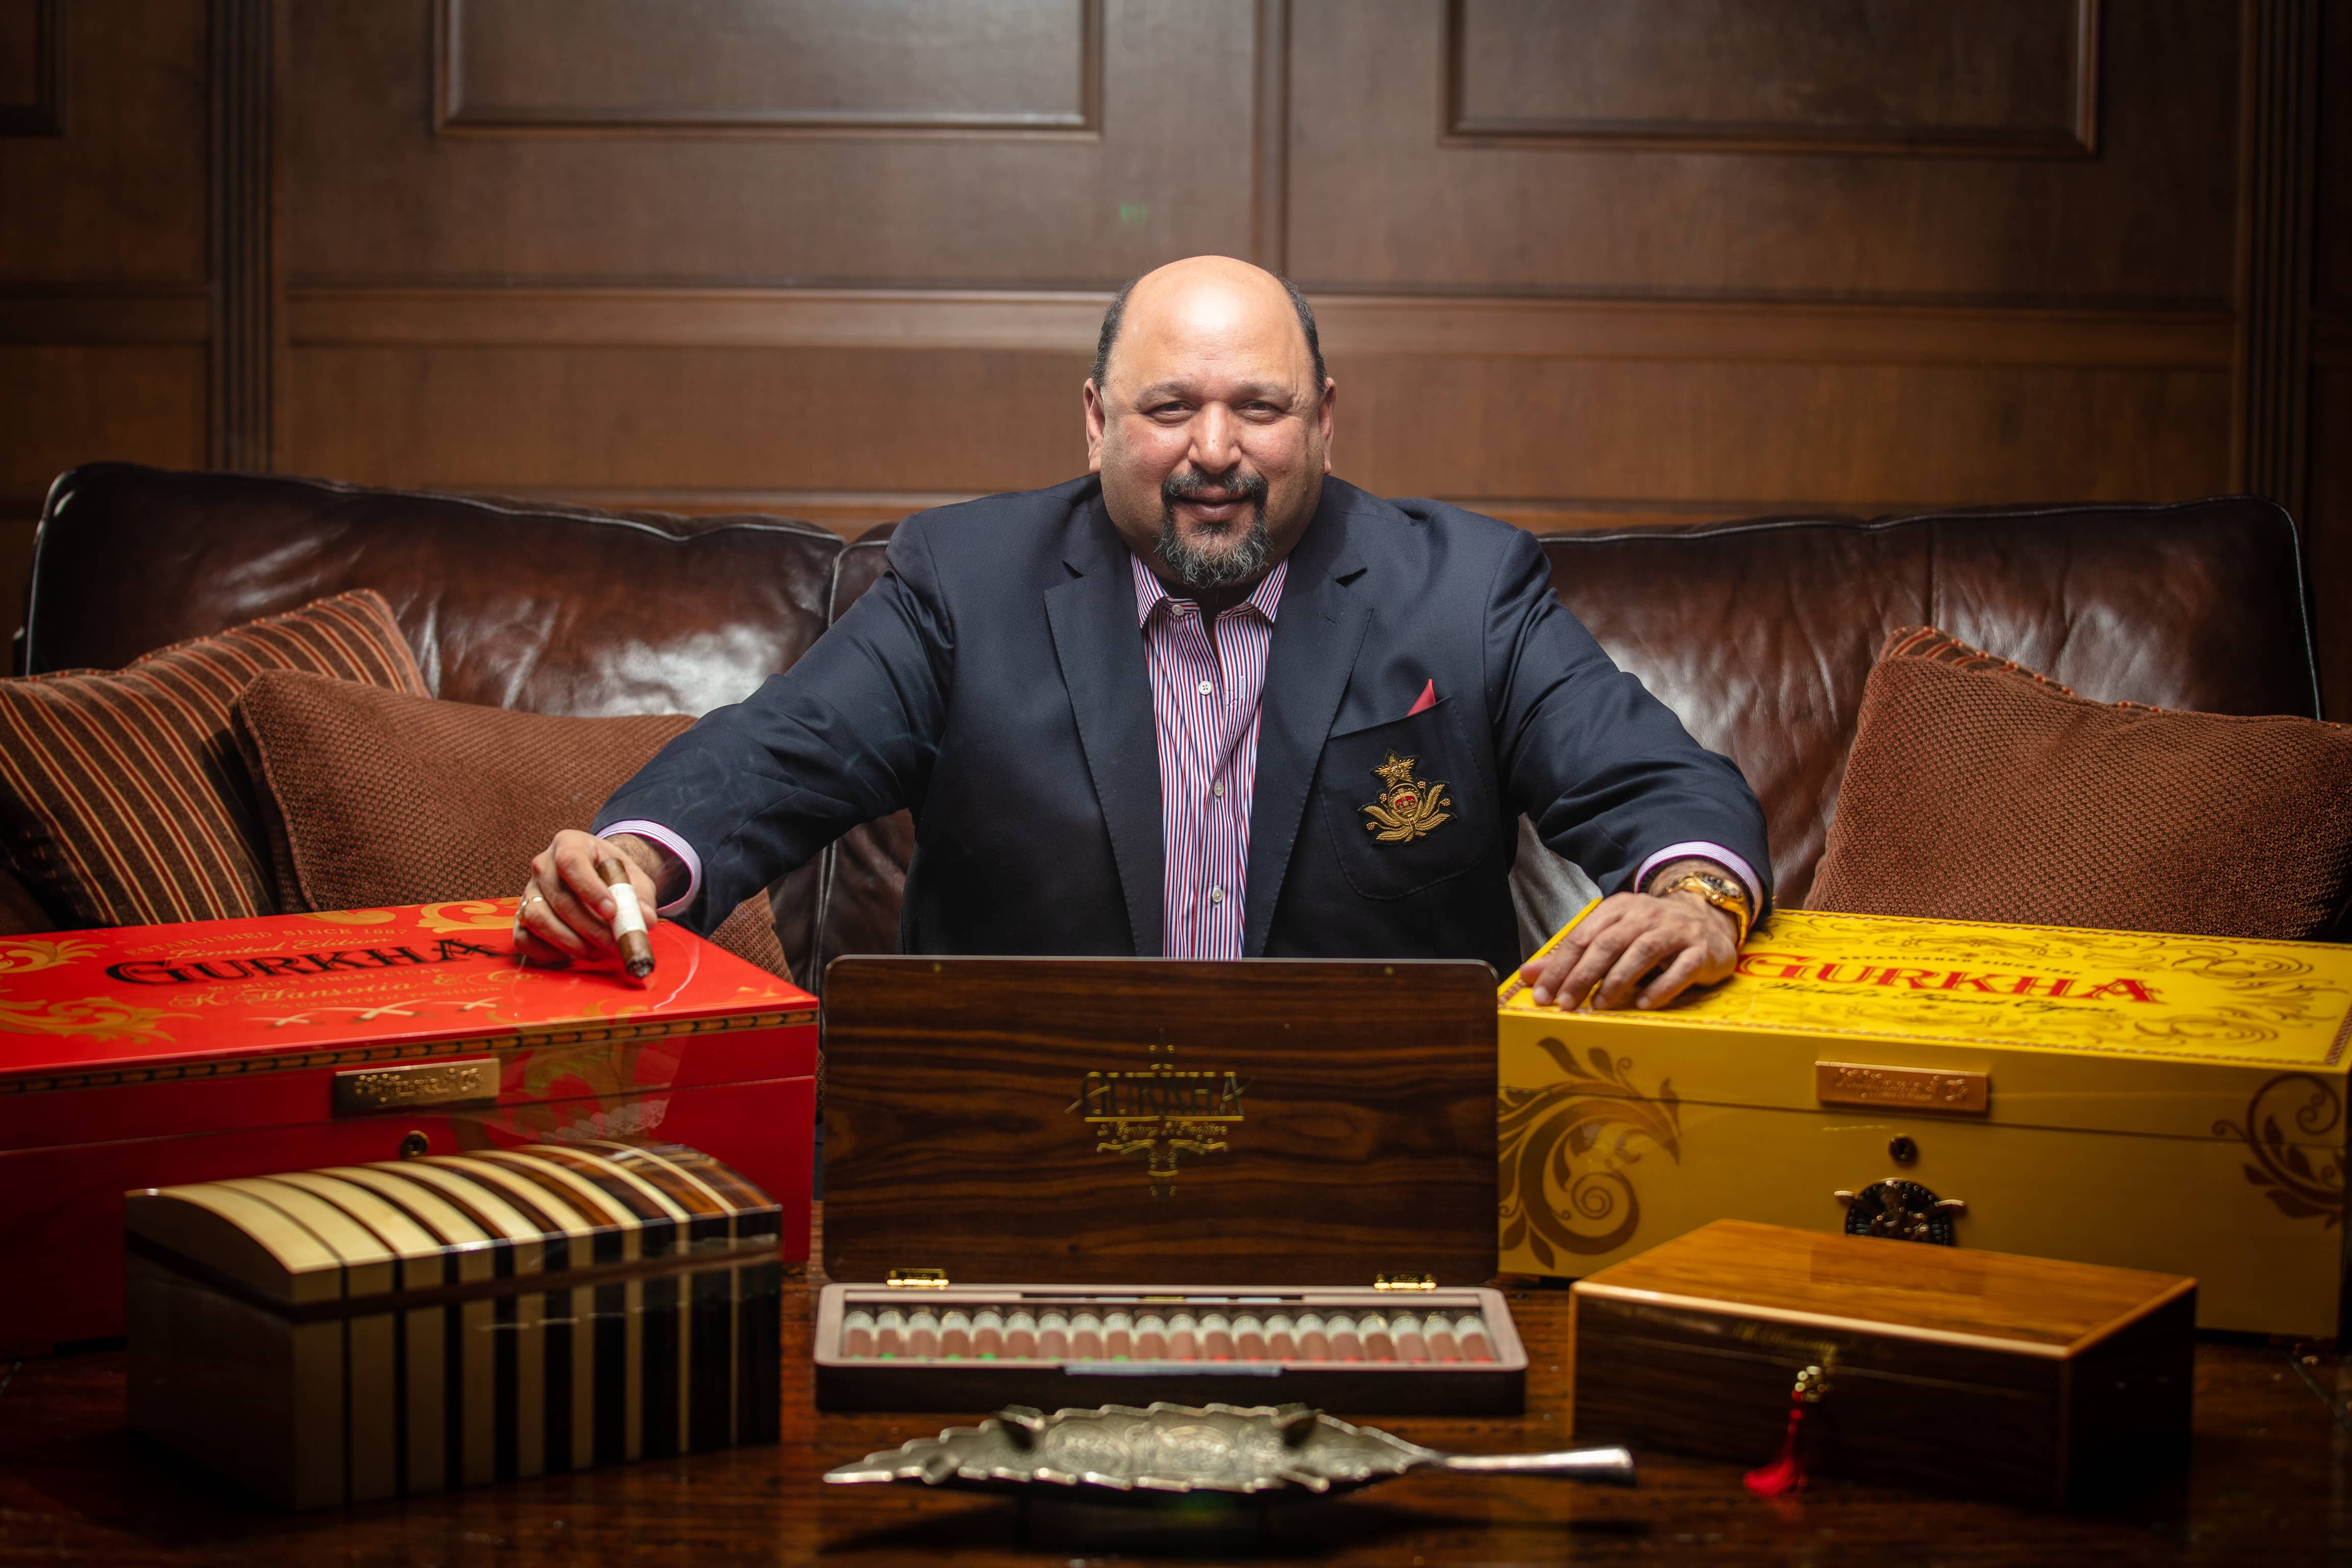 Gurkha Cigars Elevates Its Offering With Three New Cigars For IPCPR